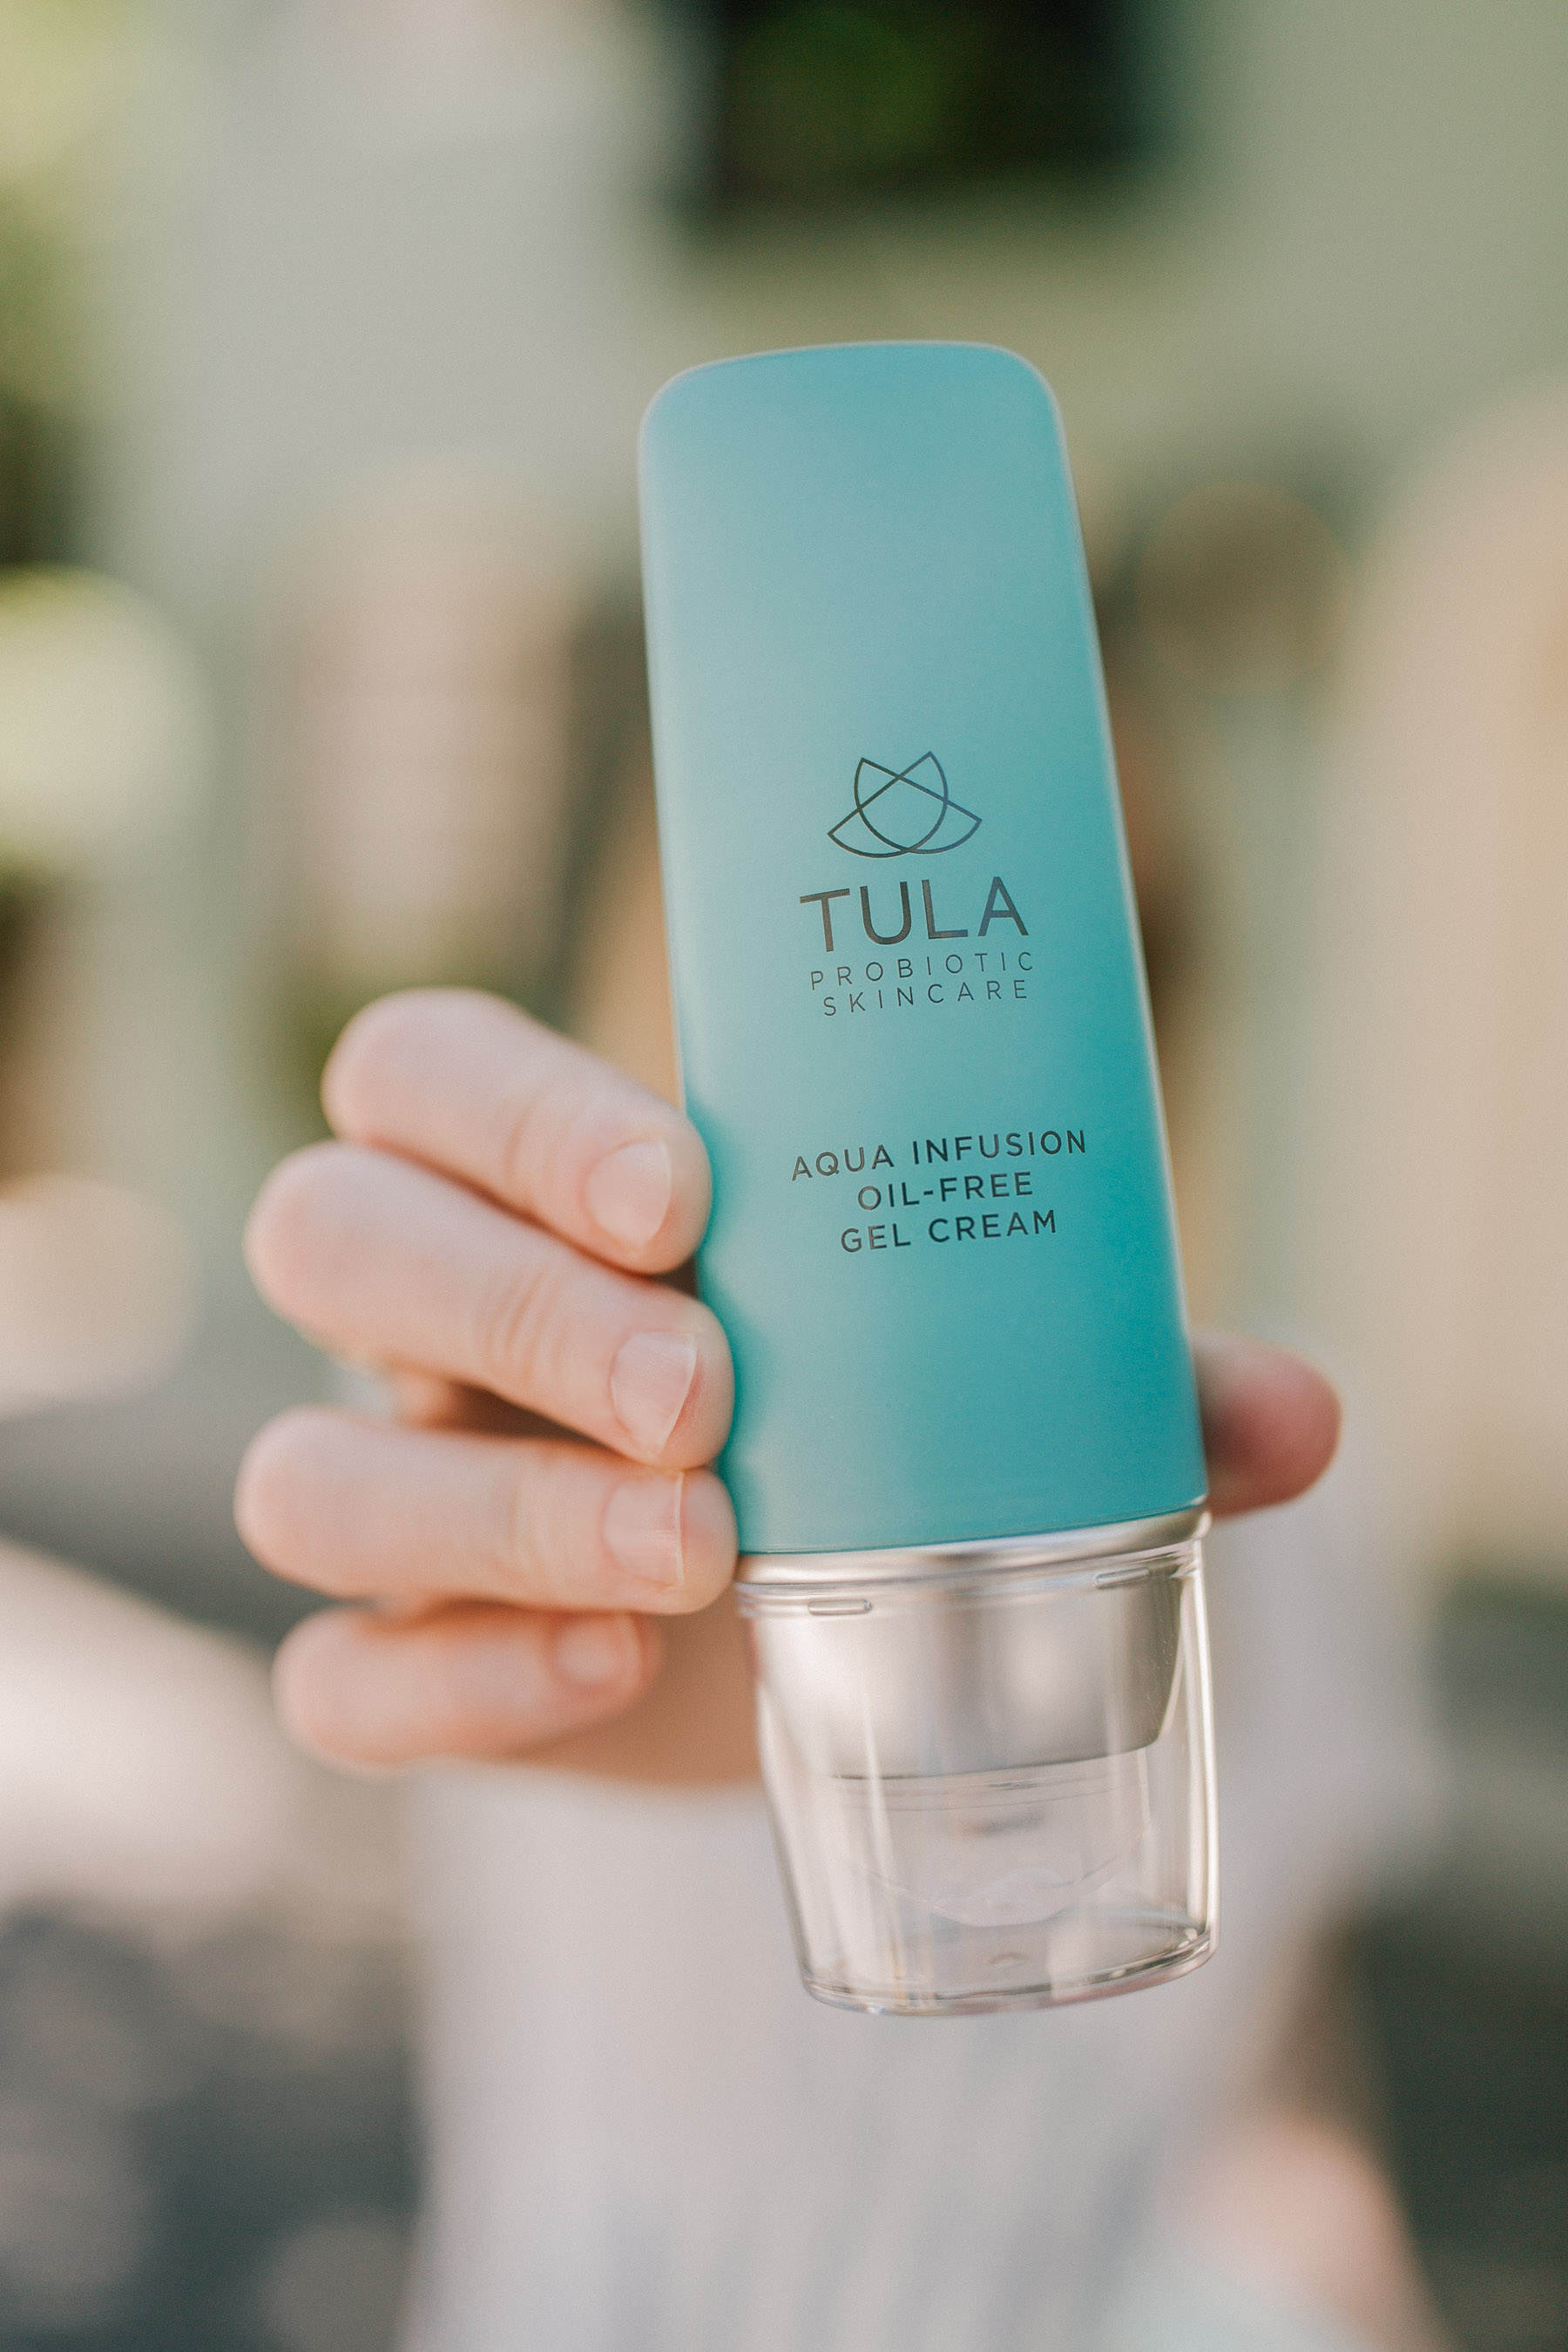 Tula Probiotic Skincare - A New Skin Solution | Kelly in the City